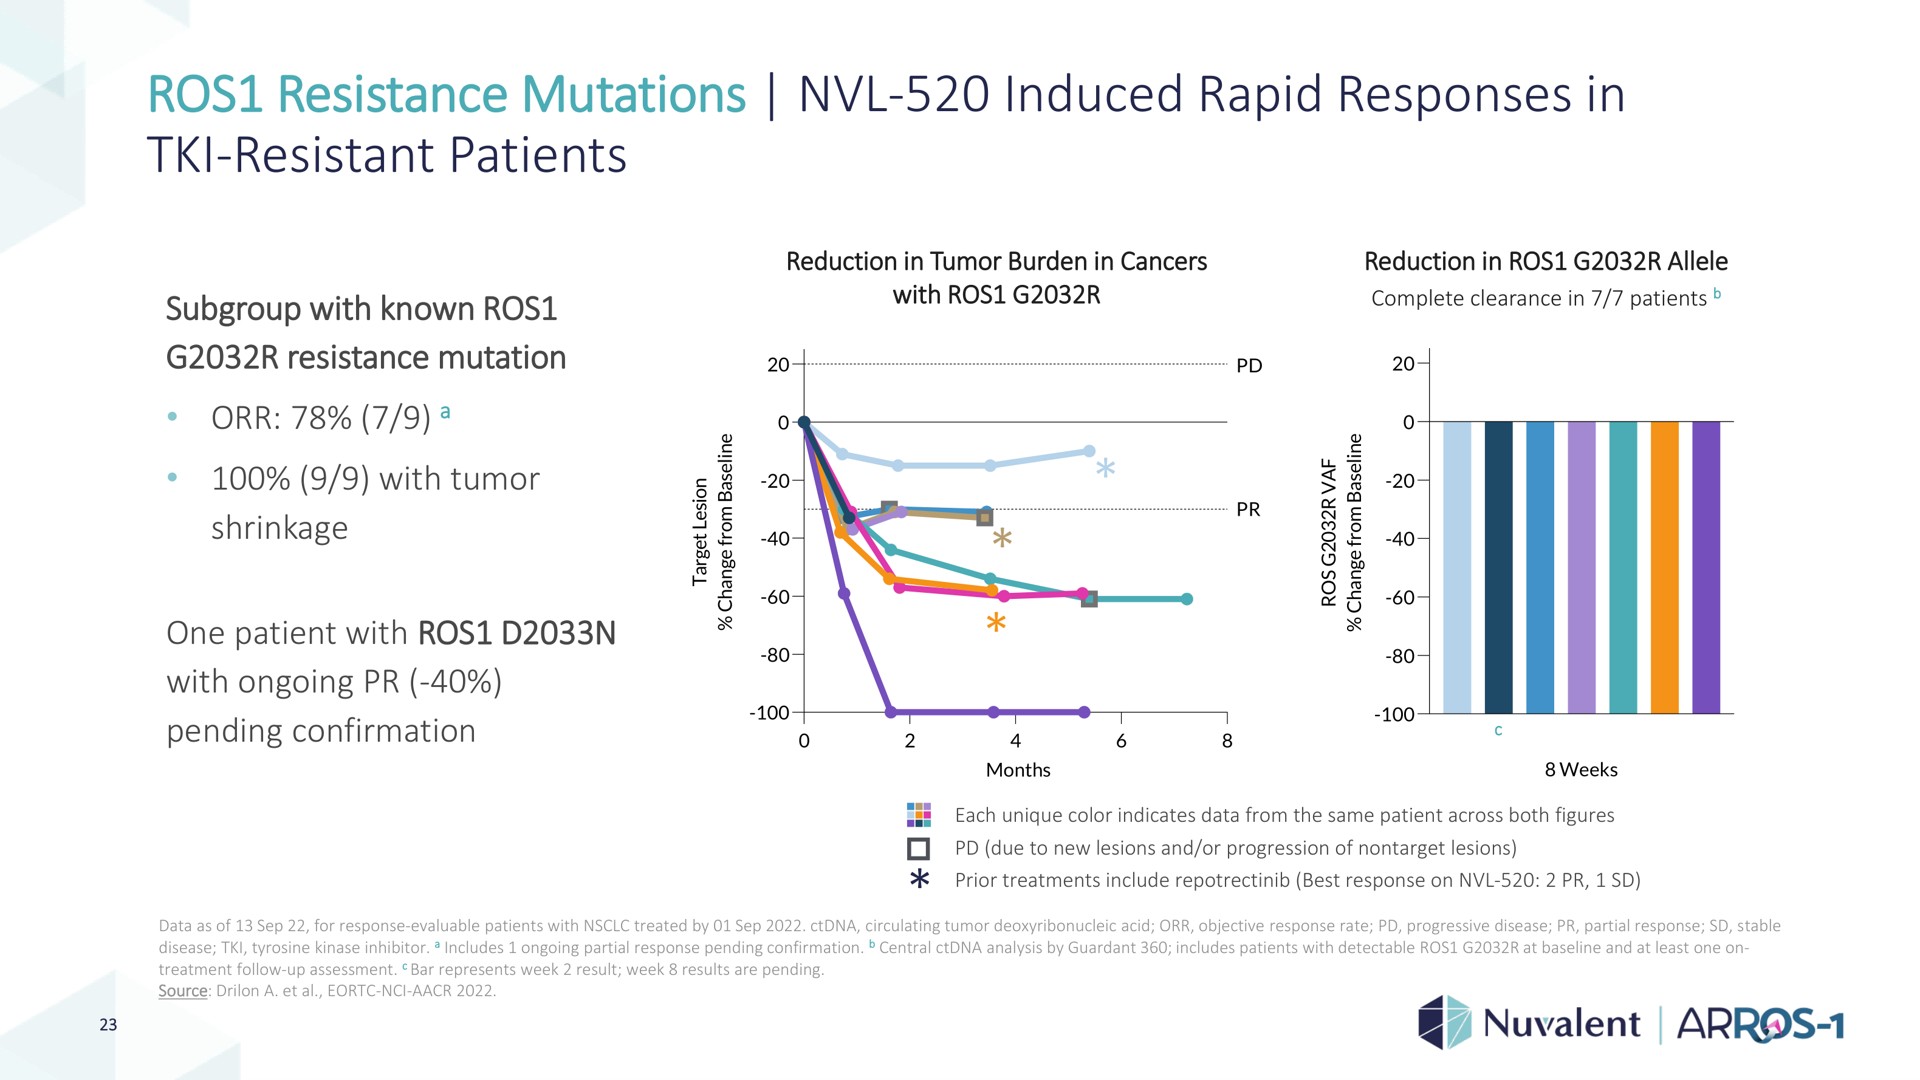 resistance mutations induced rapid responses in resistant patients with tumor | Nuvalent